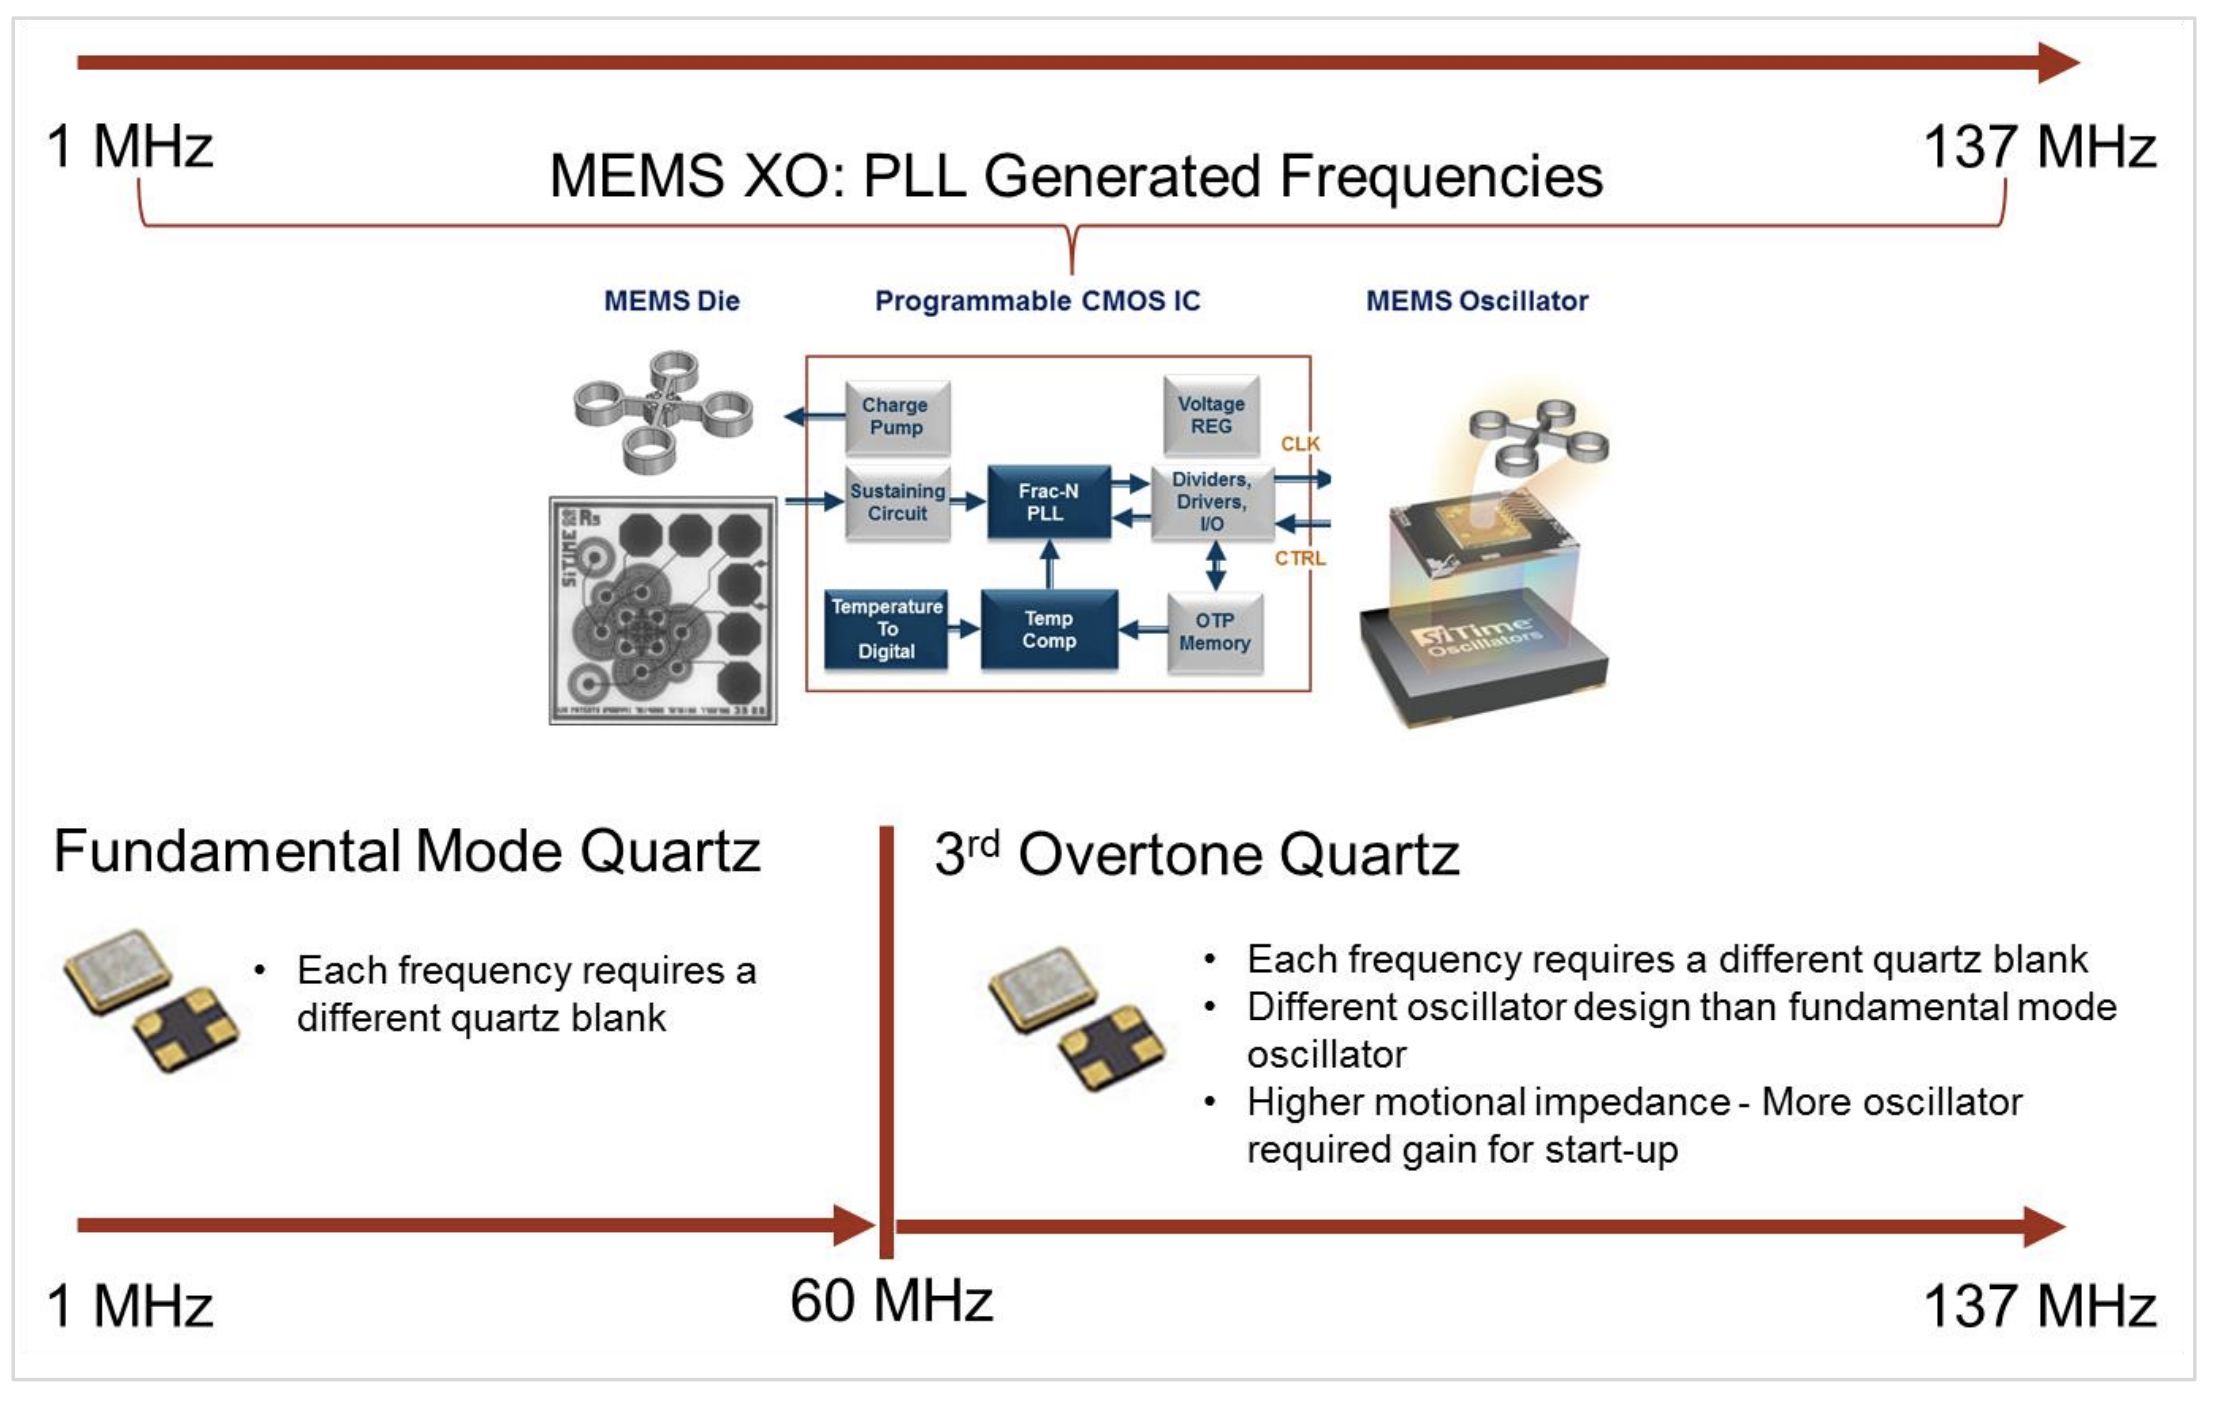 MEMS XO PLL Generated Frequences